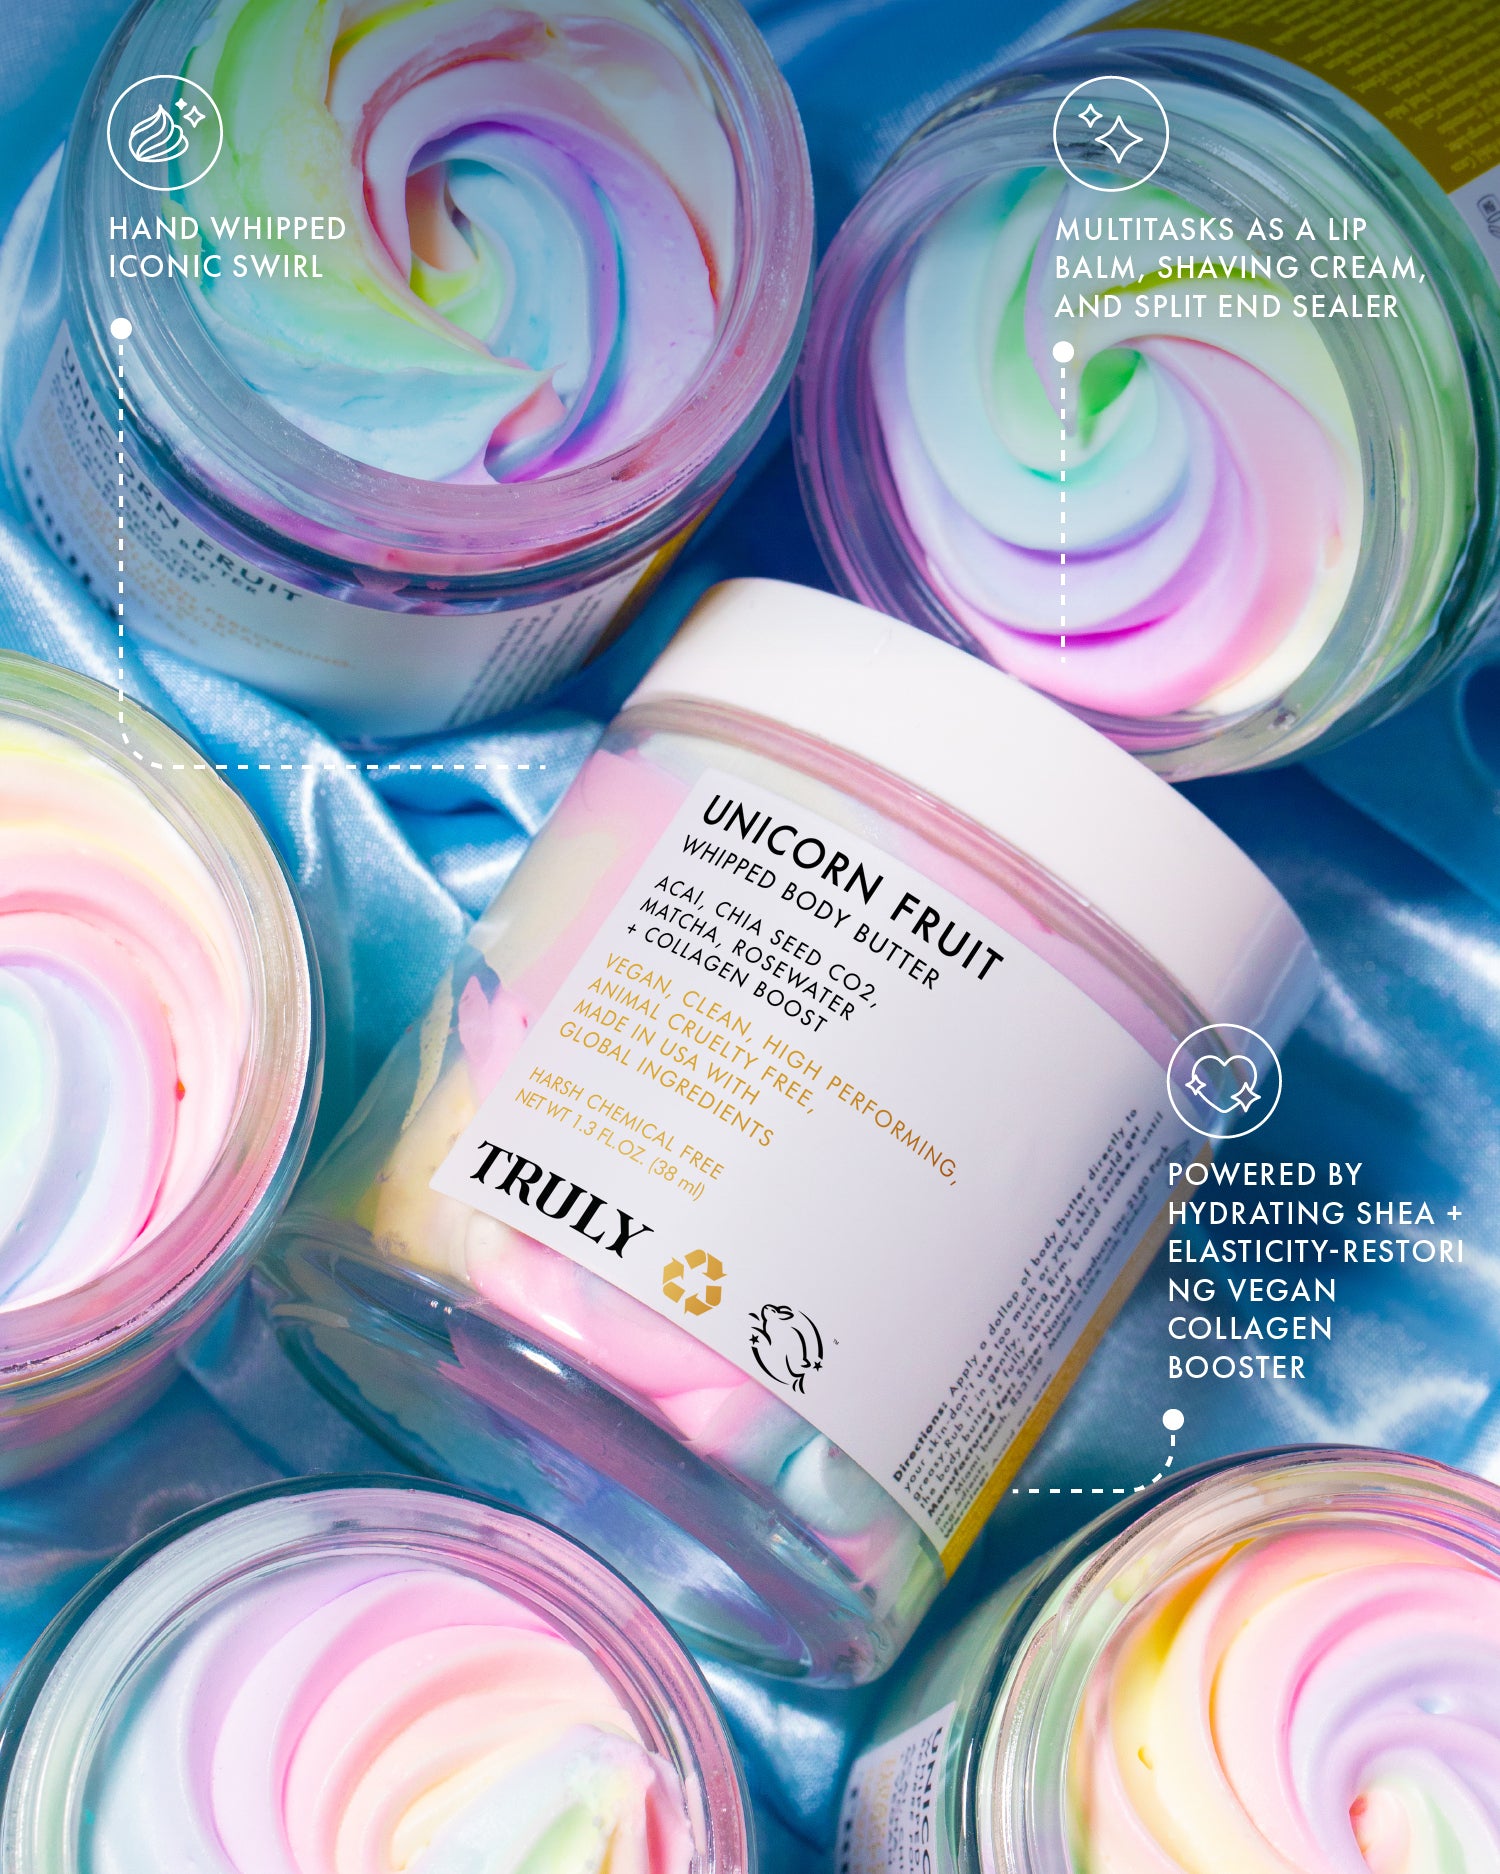 Unicorn Fruit Whipped Body Butter, Daily Deep Hydration, Dry skin solution,  Cult favourite, Vegan, superfood ingredients, Glowing + Hydrated Skin –  Truly Beauty